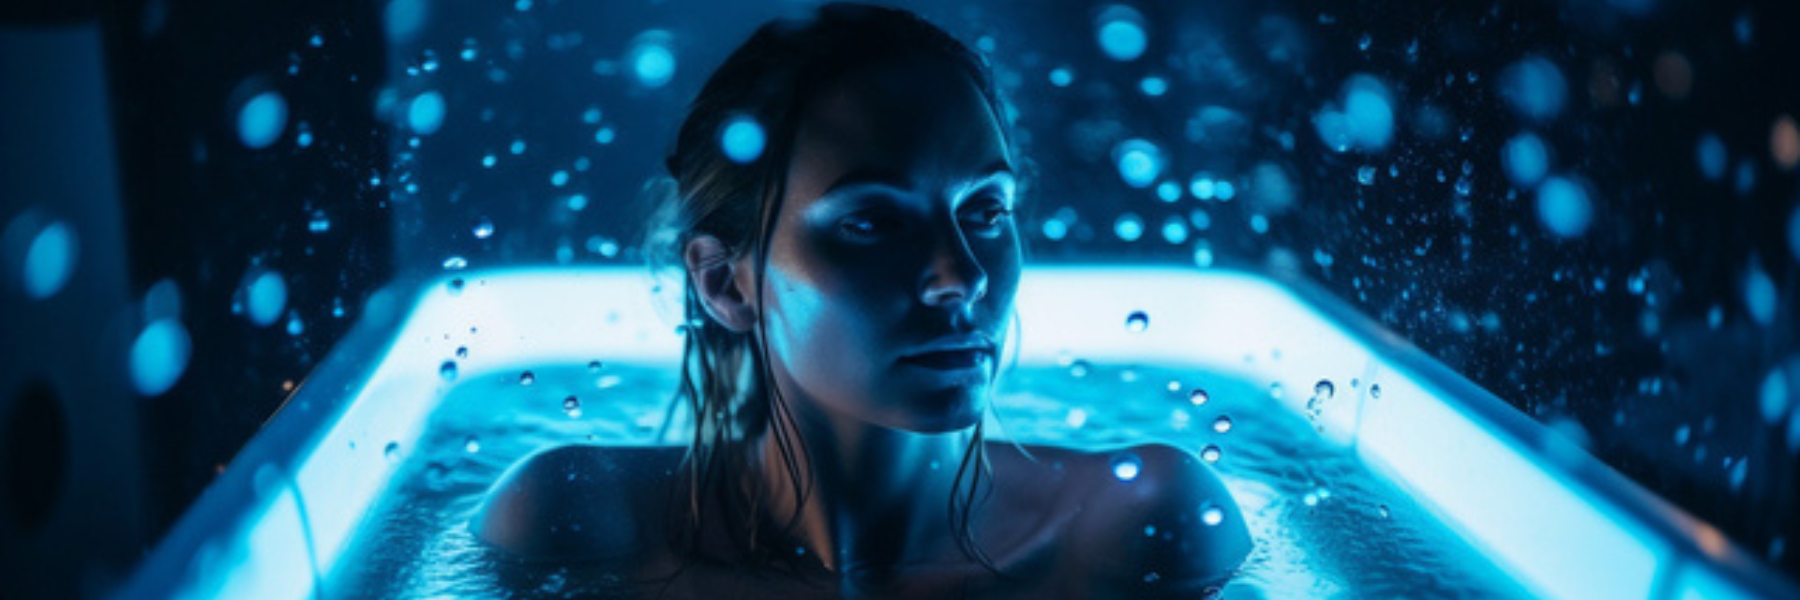 image of woman in cold plunge tub with frozen water droplets appearing to be coming from the ground up with fluorescent ambient lighting in an image banner for Plunge Tub Hub-residential cold plunge tubs-commercial-cold plunge tubs-image banner-woman in cold plunge tub